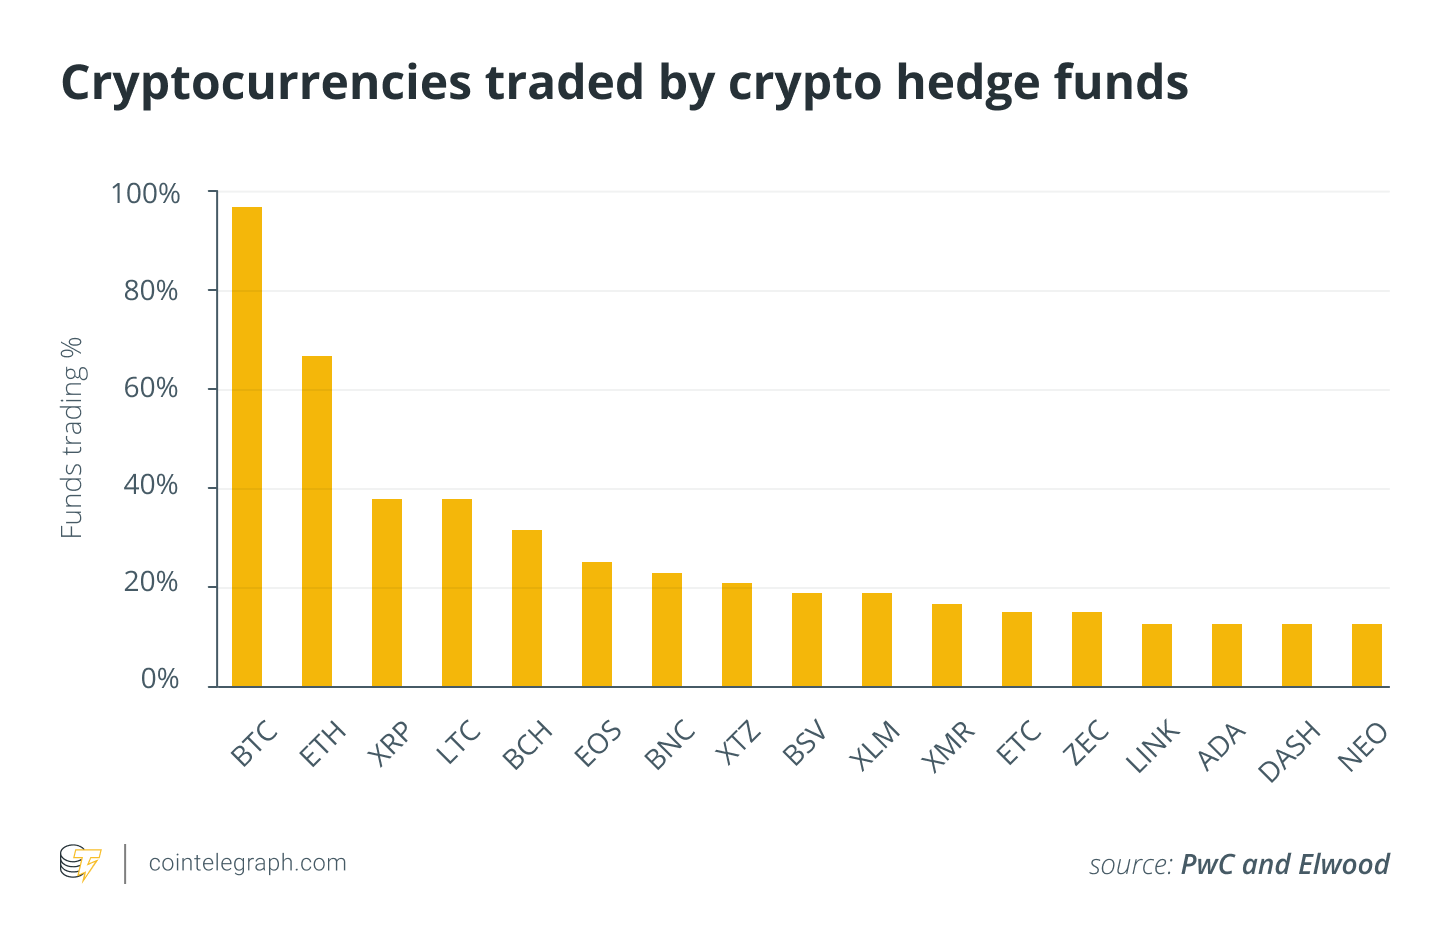 Cryptocurrencies traded by crypto hedge funds